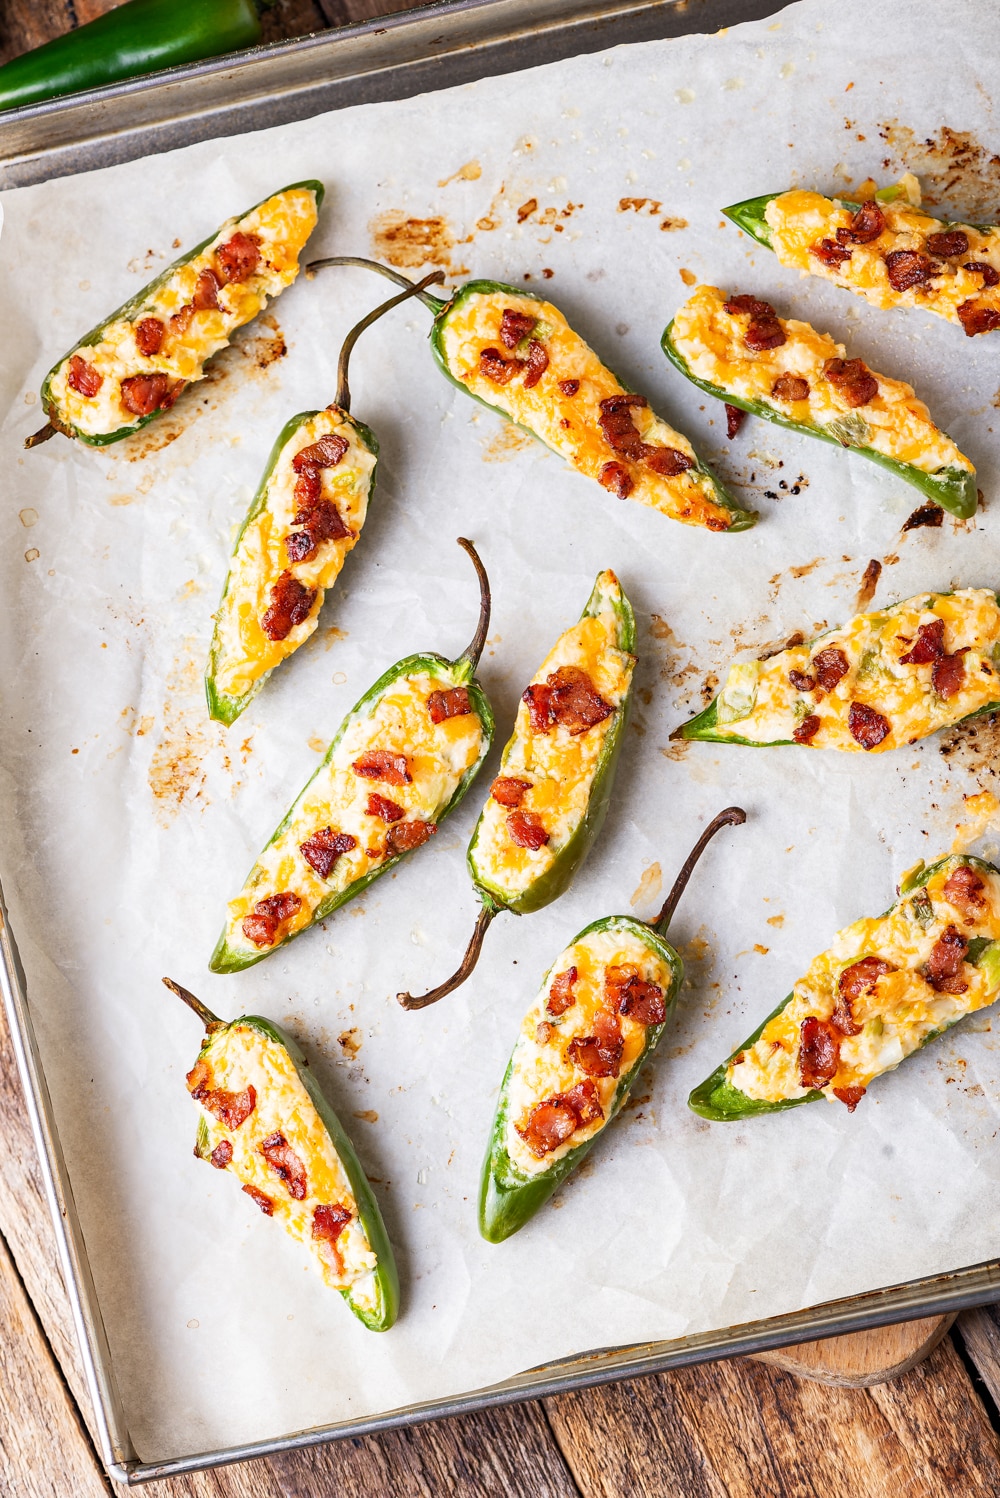 Jalapeno poppers topped with bacon on a baking sheet that's set on a wooden table.